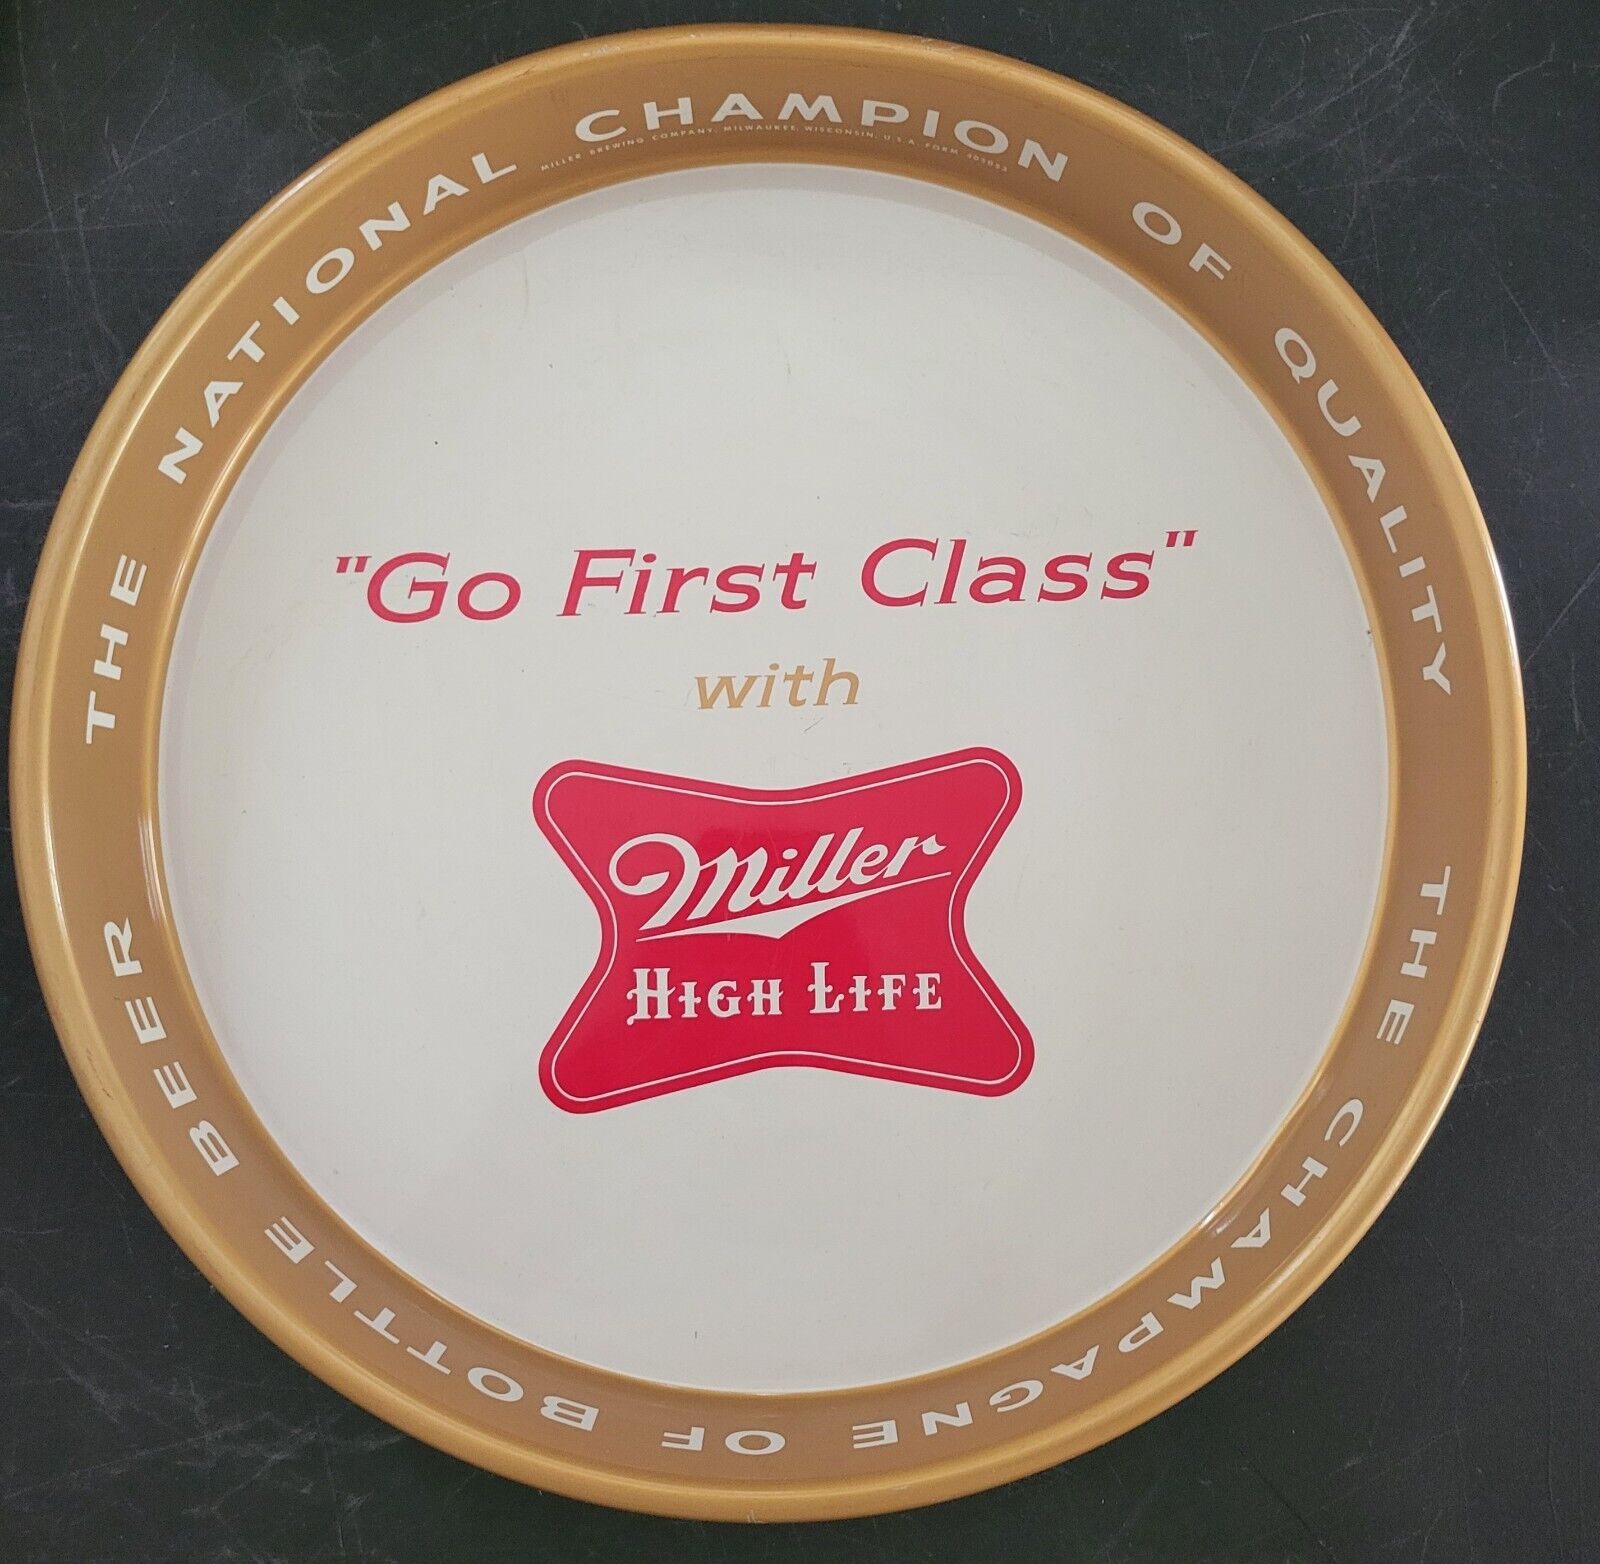 VINTAGE MILLER HIGH LIFE GO FIRST CLASS BEER TRAY